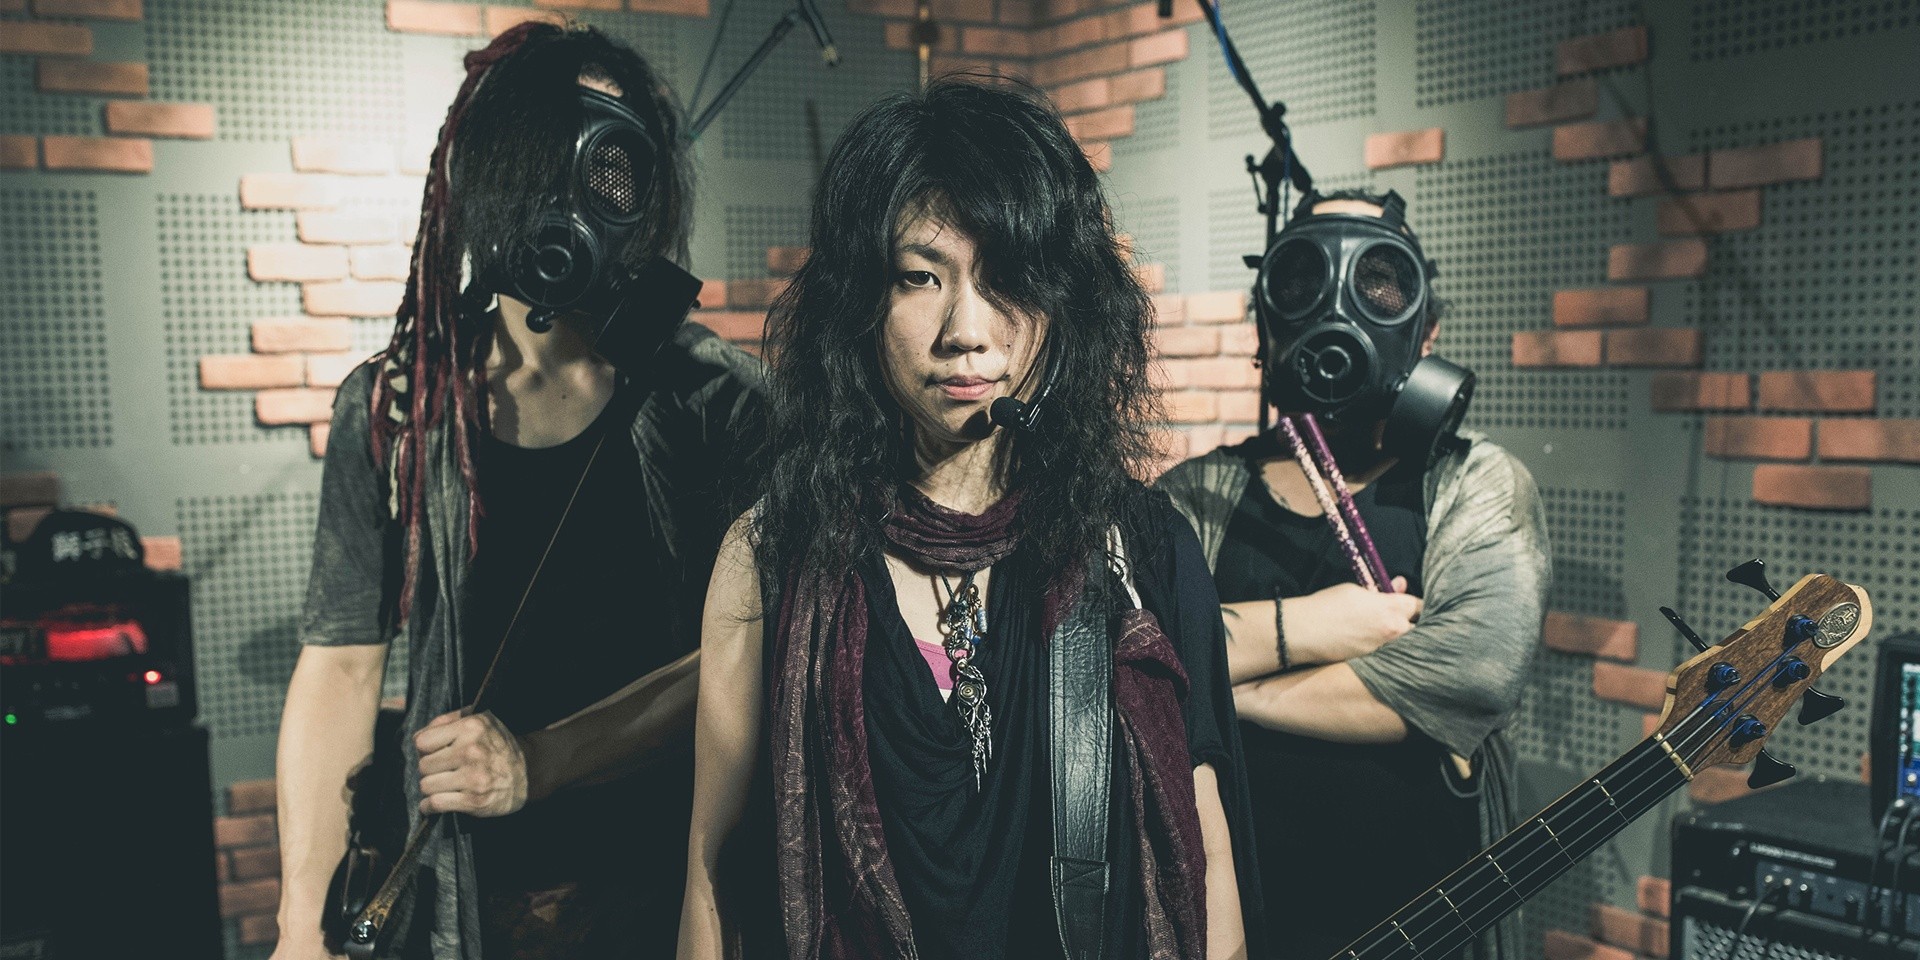 WATCH: Unclose perform 'Kyome' and 'Gunjyo' in The Music Parlour for Bandwagon Presents